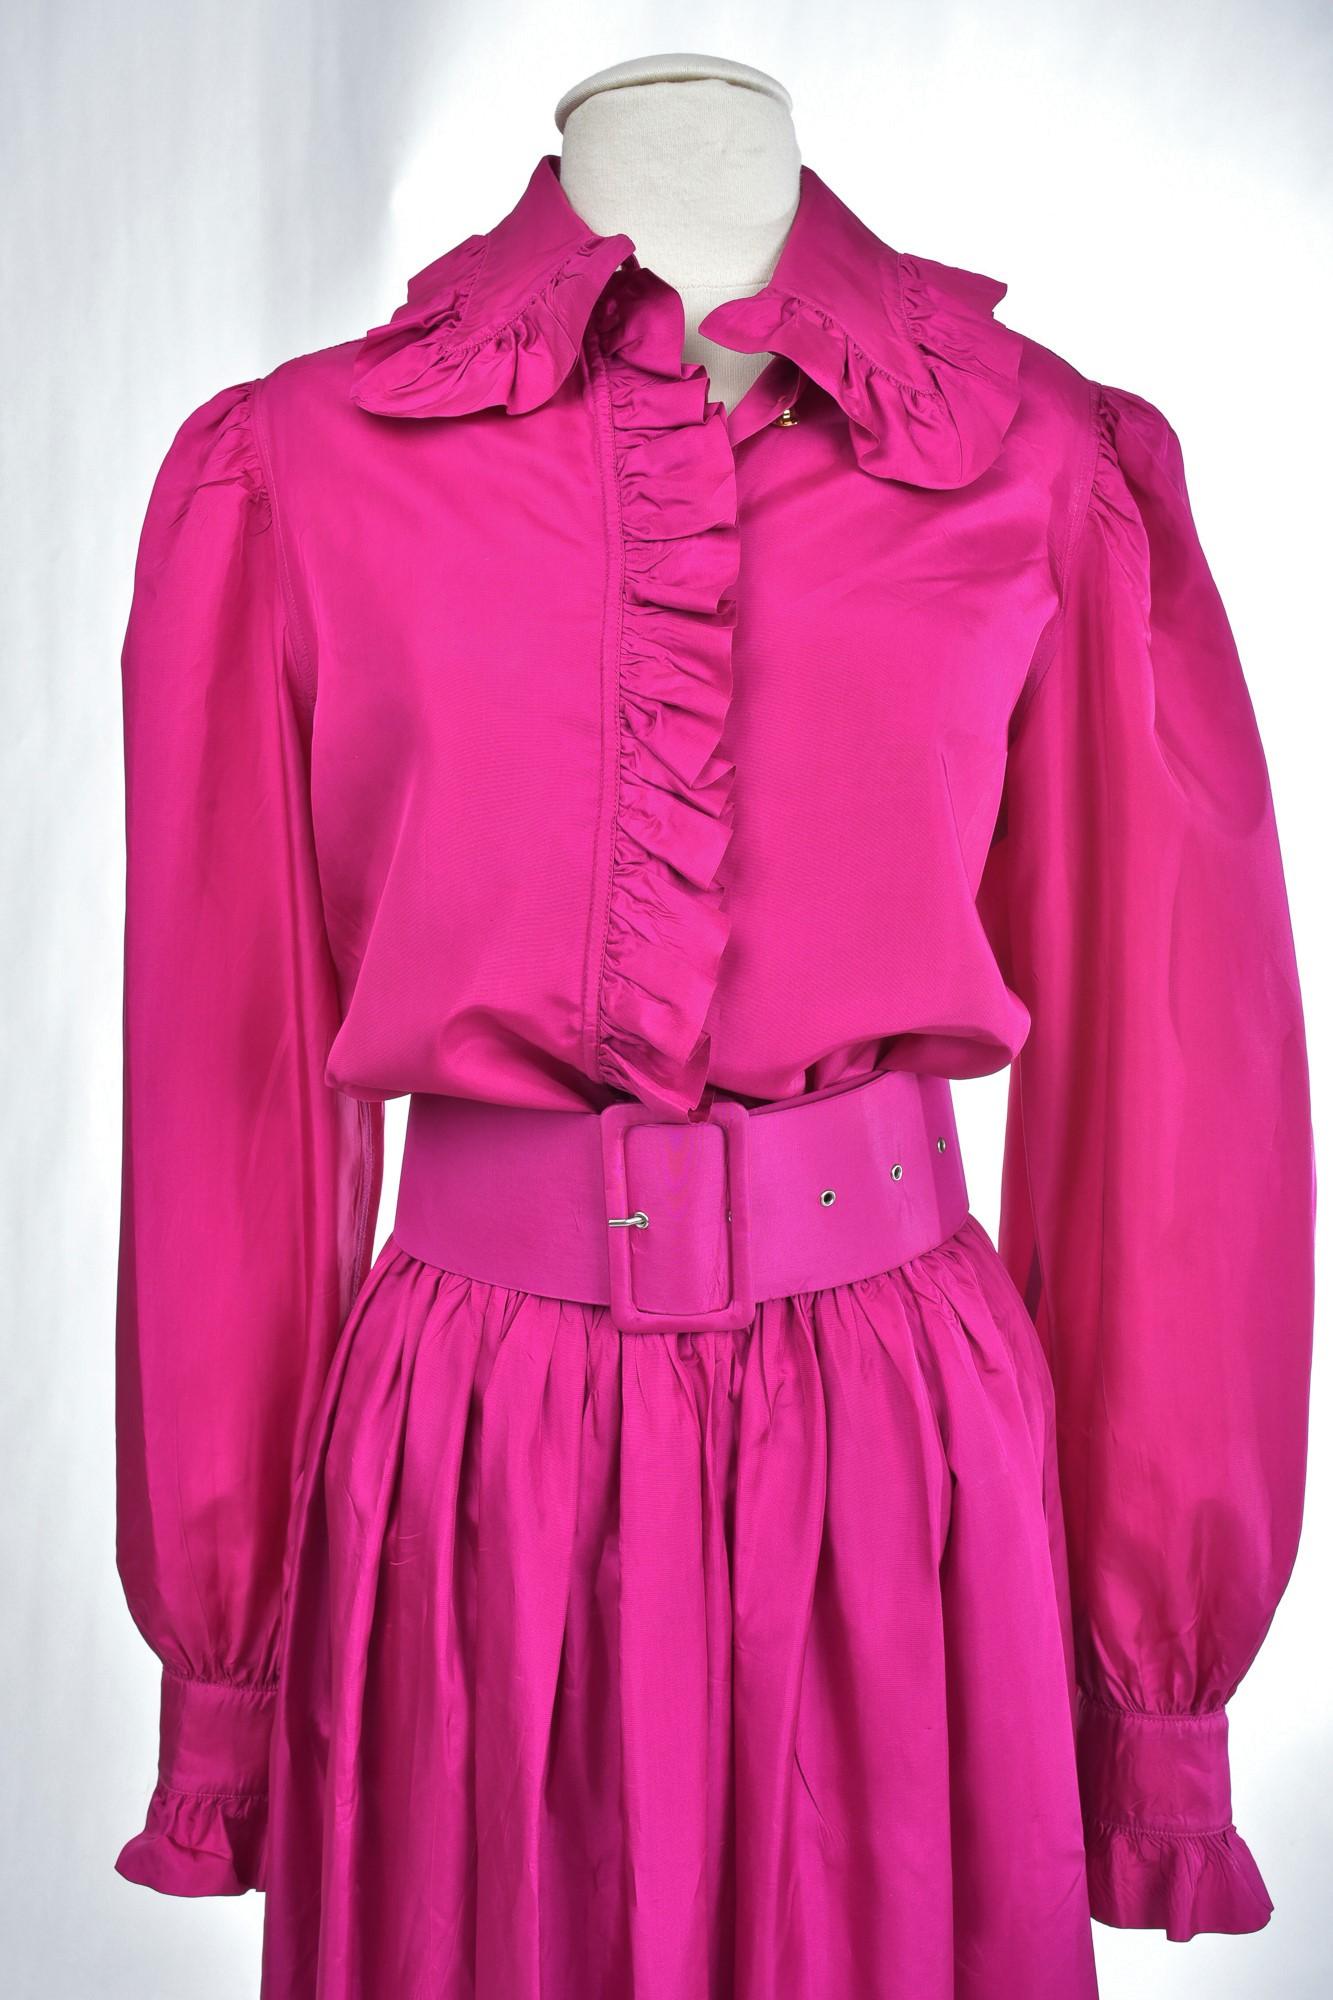 Circa 1990

France

Dramatic skirt, blouse and belt in acetate taffeta Fuschia by the Parisian designer Popy Moreni and dating from the 1990s.  Blouse blouse long sleeves puffed collar highlighted by falbalas gathered with recall on the front and